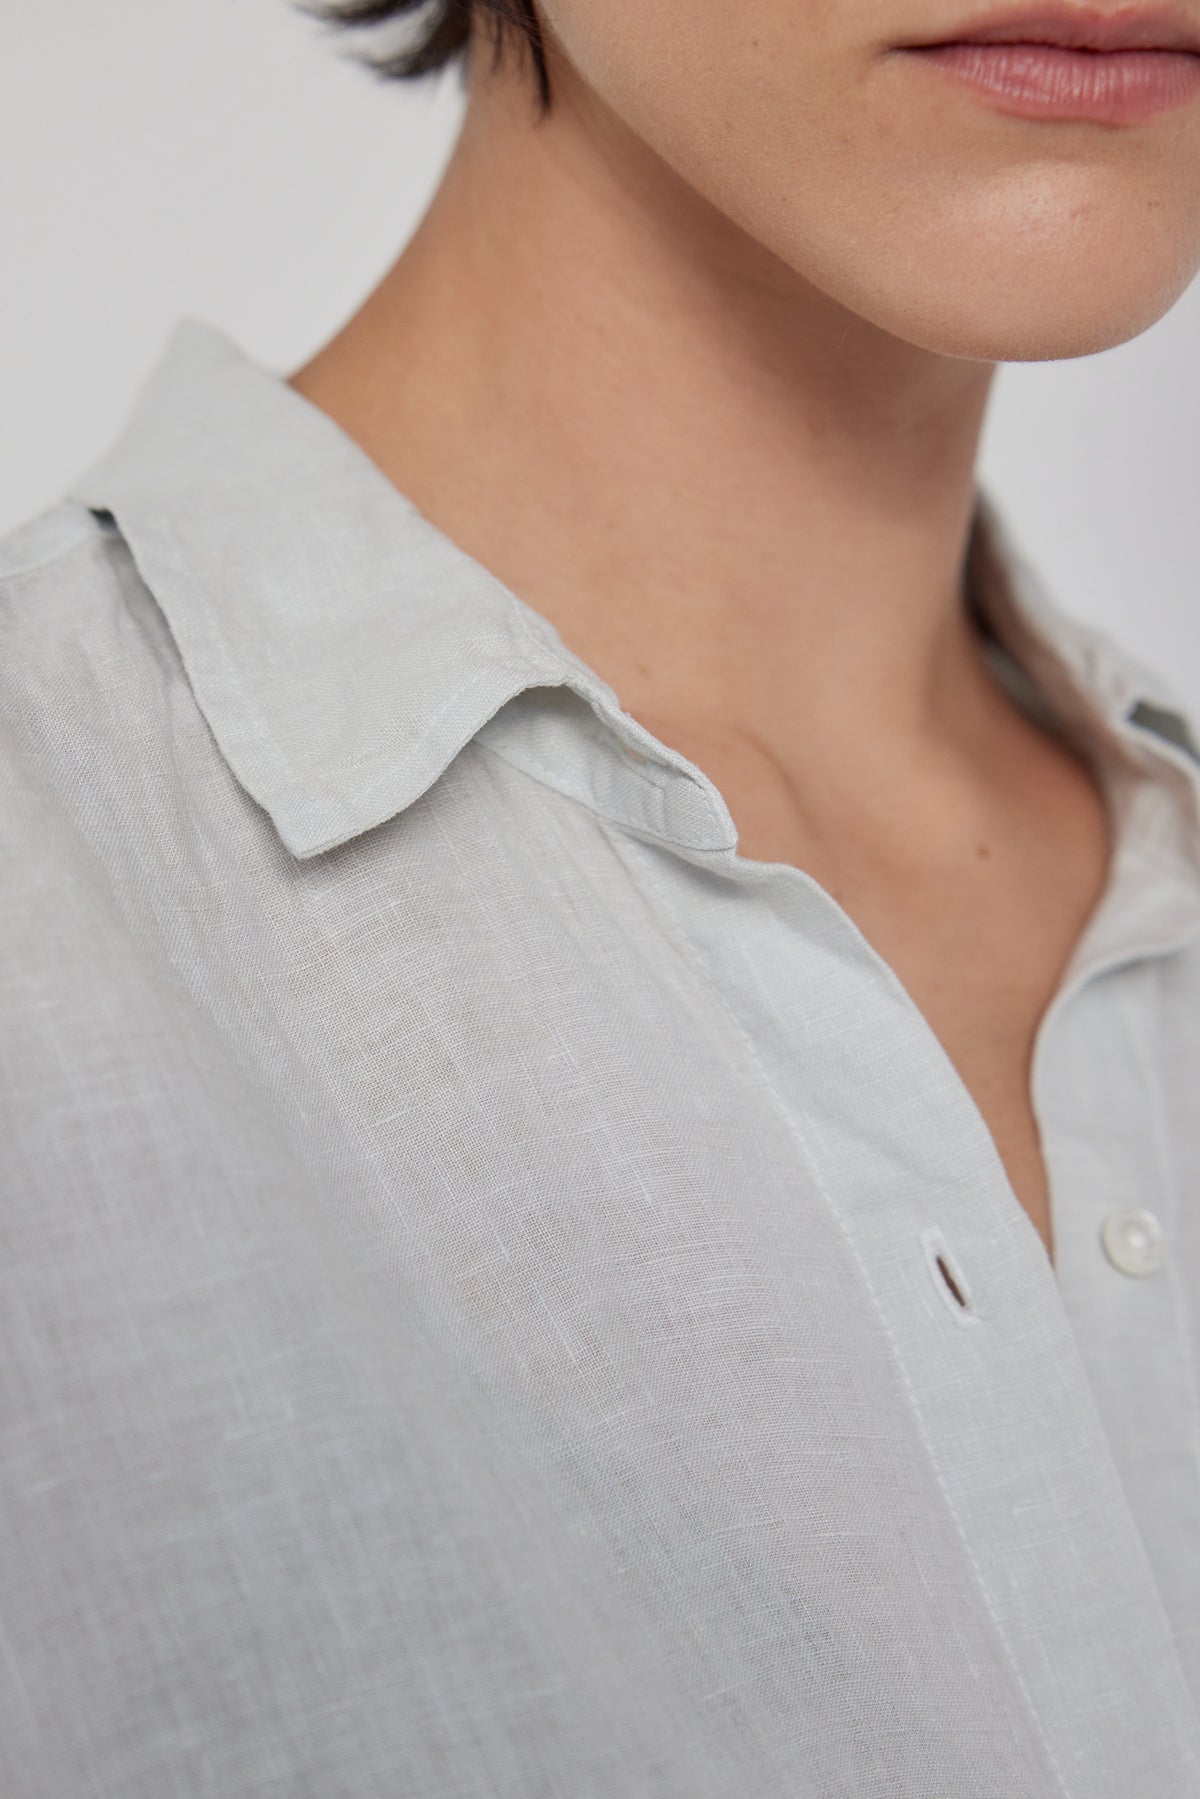 Close-up of a person wearing a Velvet by Jenny Graham Claremont Linen Shirt, focusing on the collar and top button, with part of their lower face visible.-36168678310081